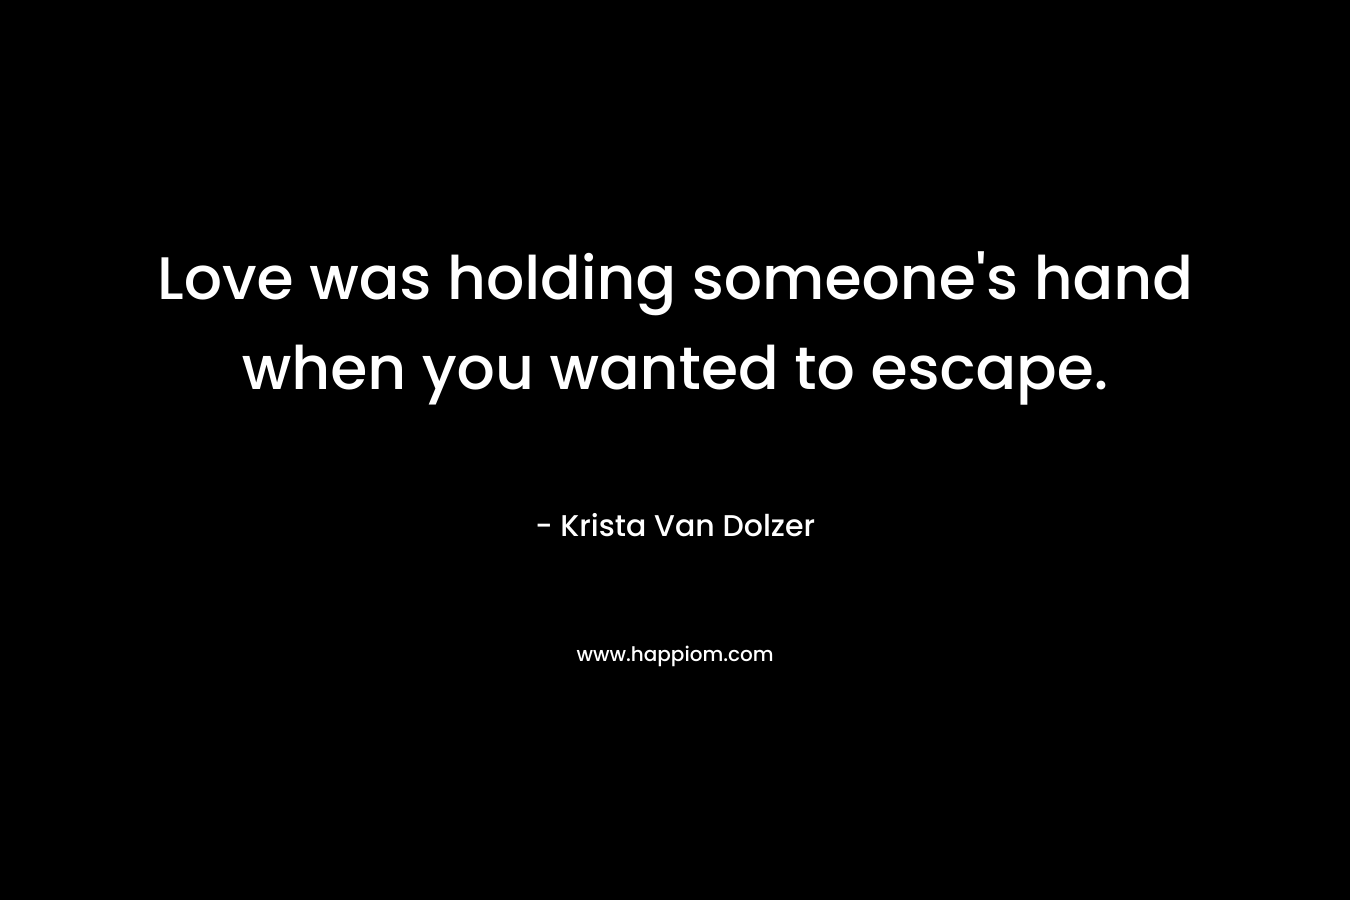 Love was holding someone's hand when you wanted to escape.